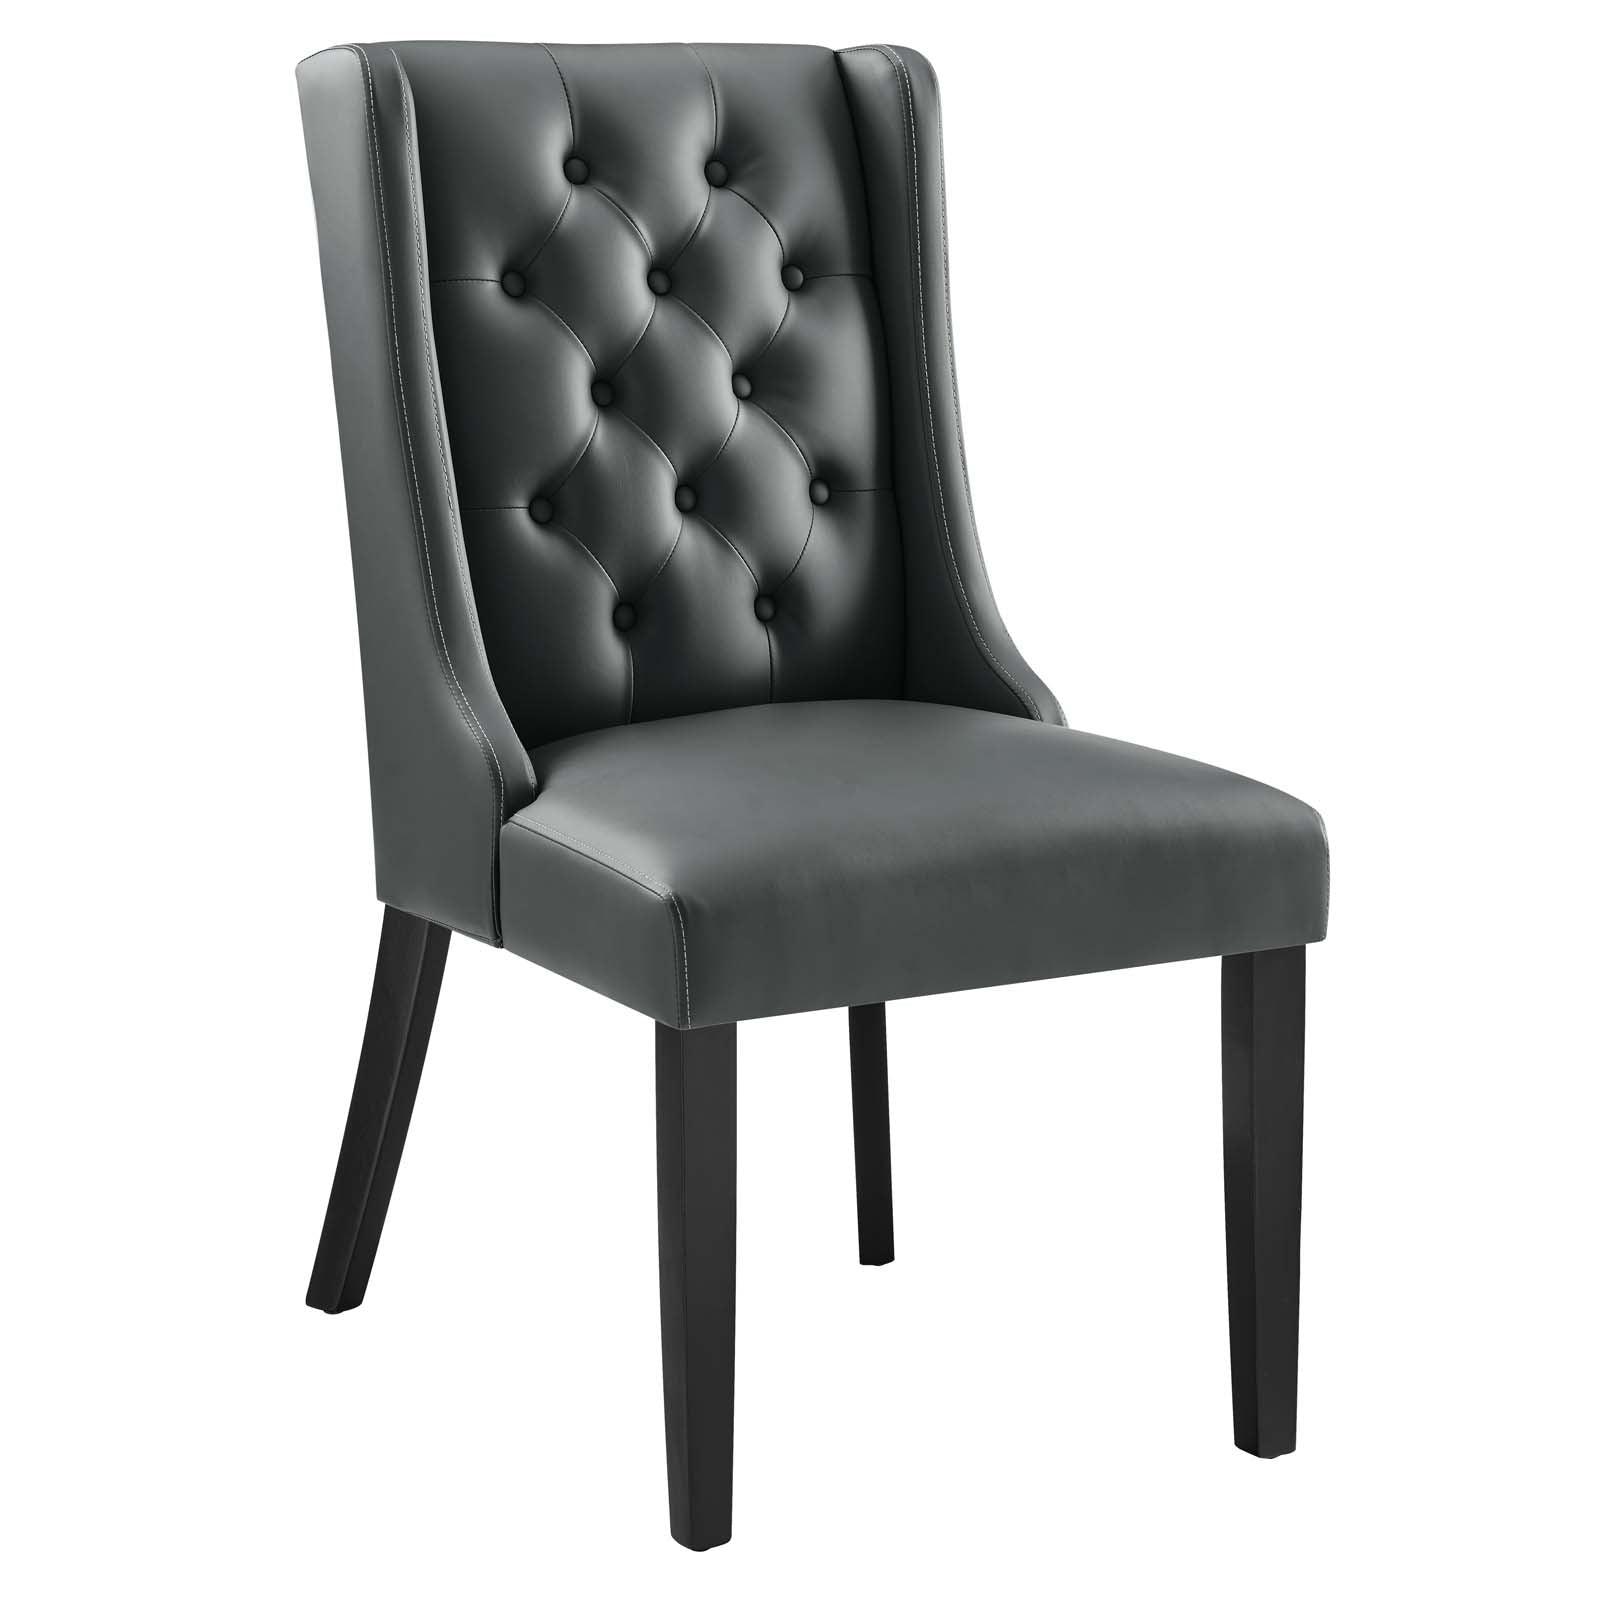 Baronet Button Tufted Vegan Leather Dining Chair - East Shore Modern Home Furnishings